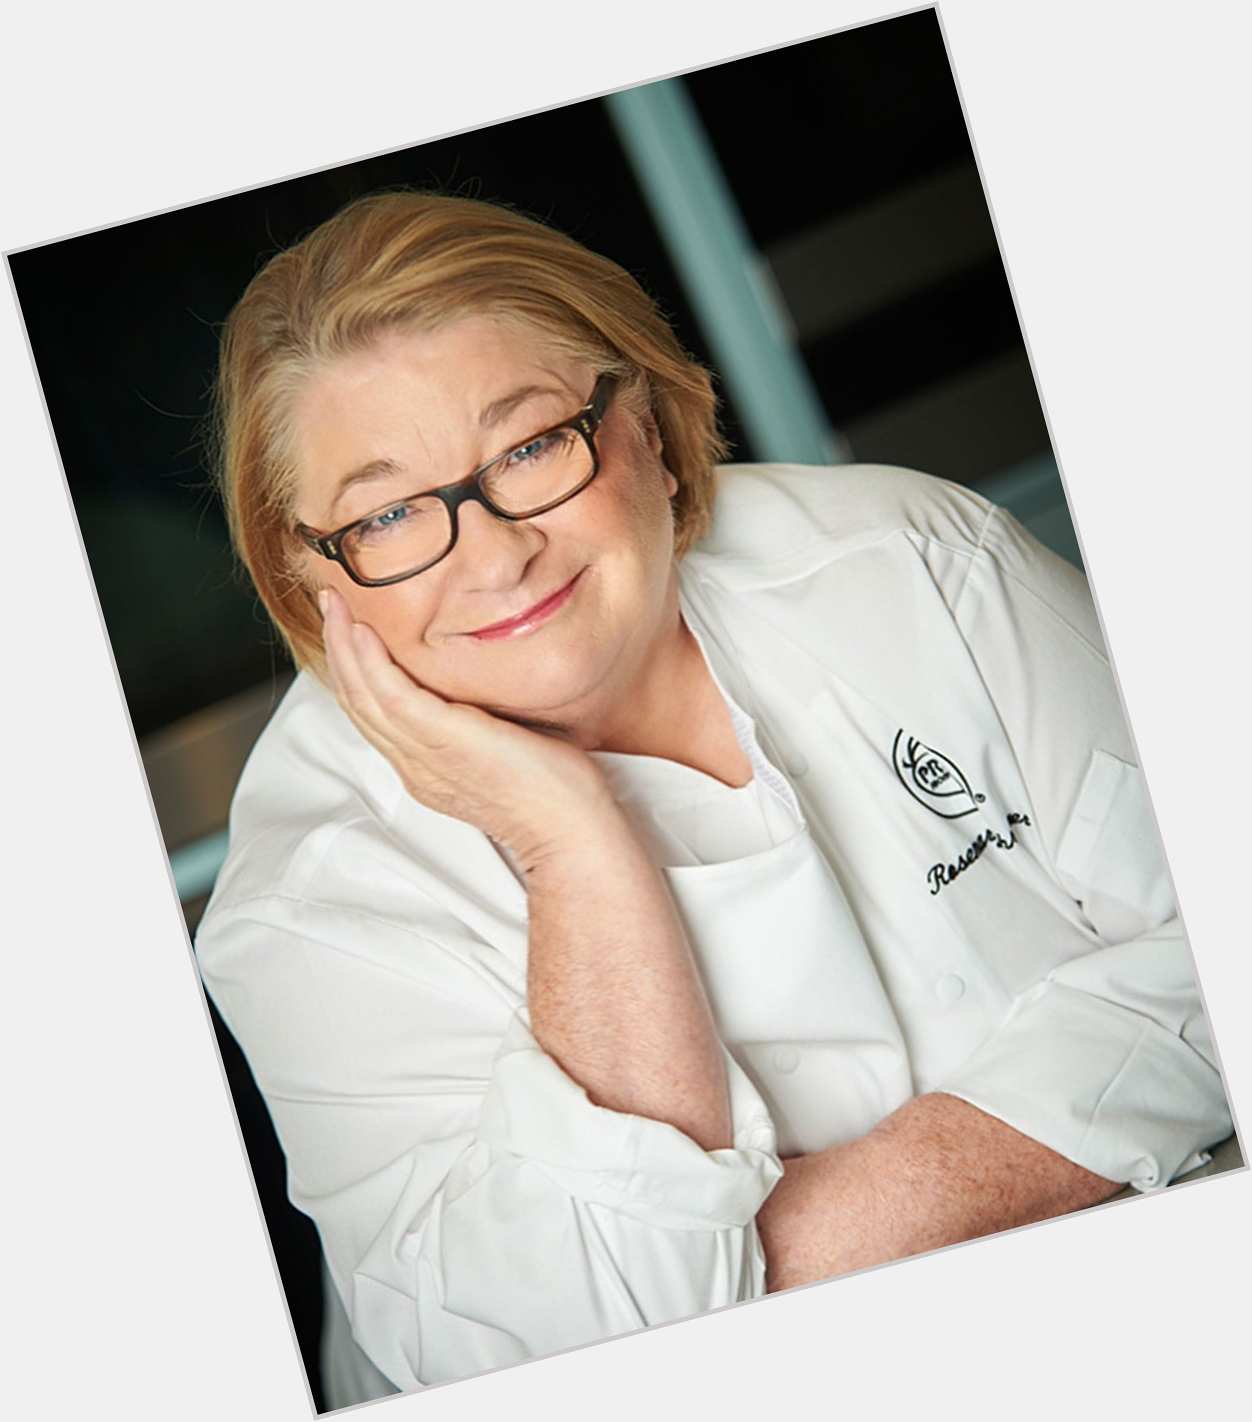 Https://fanpagepress.net/m/R/Rosemary Shrager New Pic 1